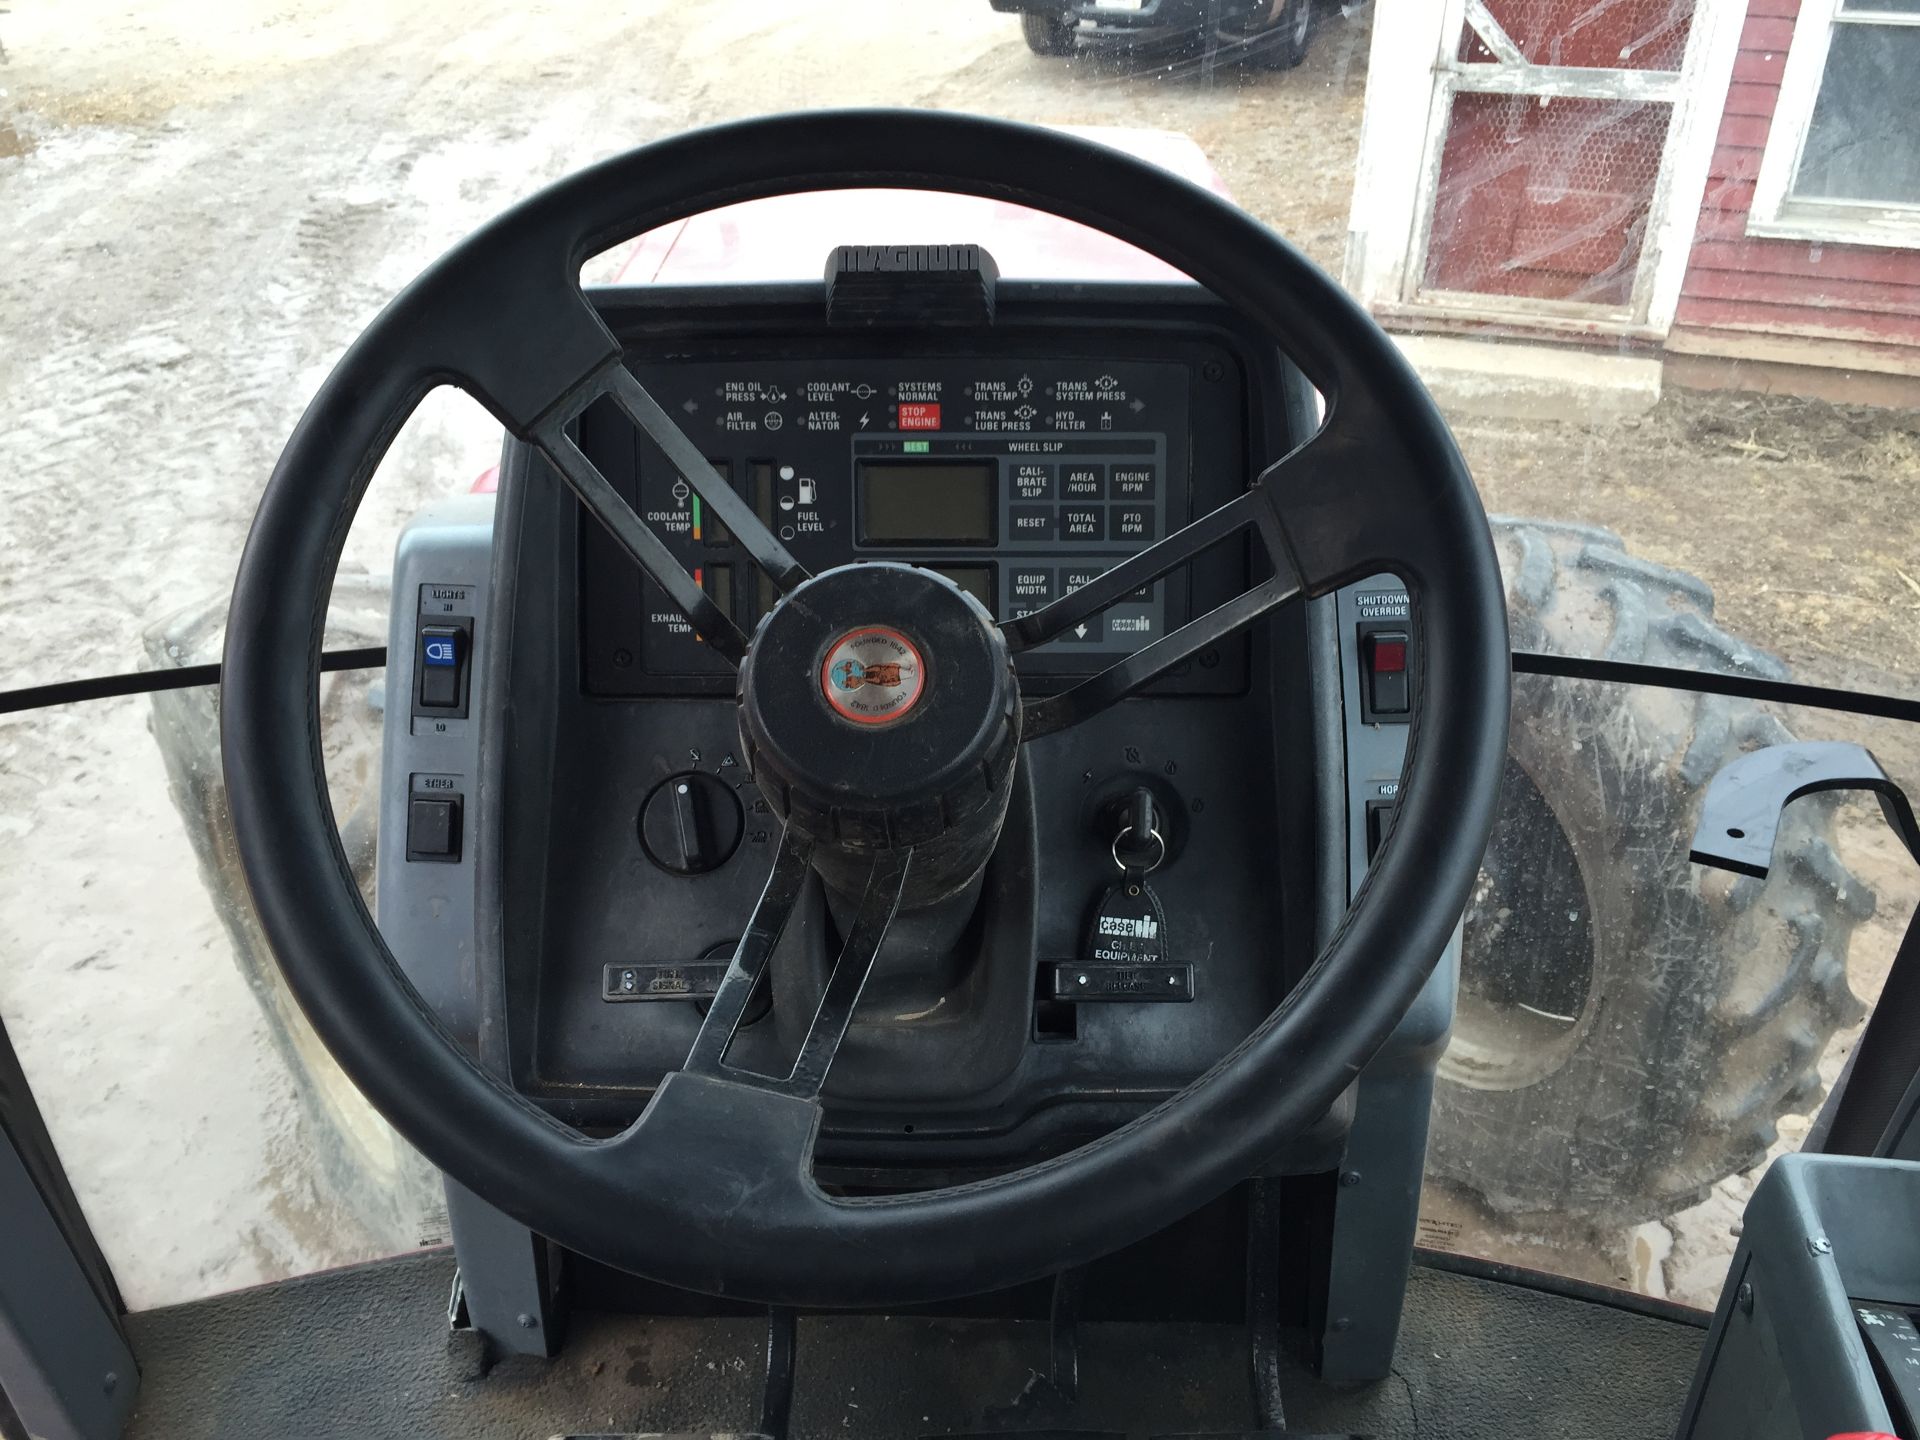 7120 Case International 4x4 Tractor ~7100hrs - not sold w/ quick hitch pictured - Image 17 of 22